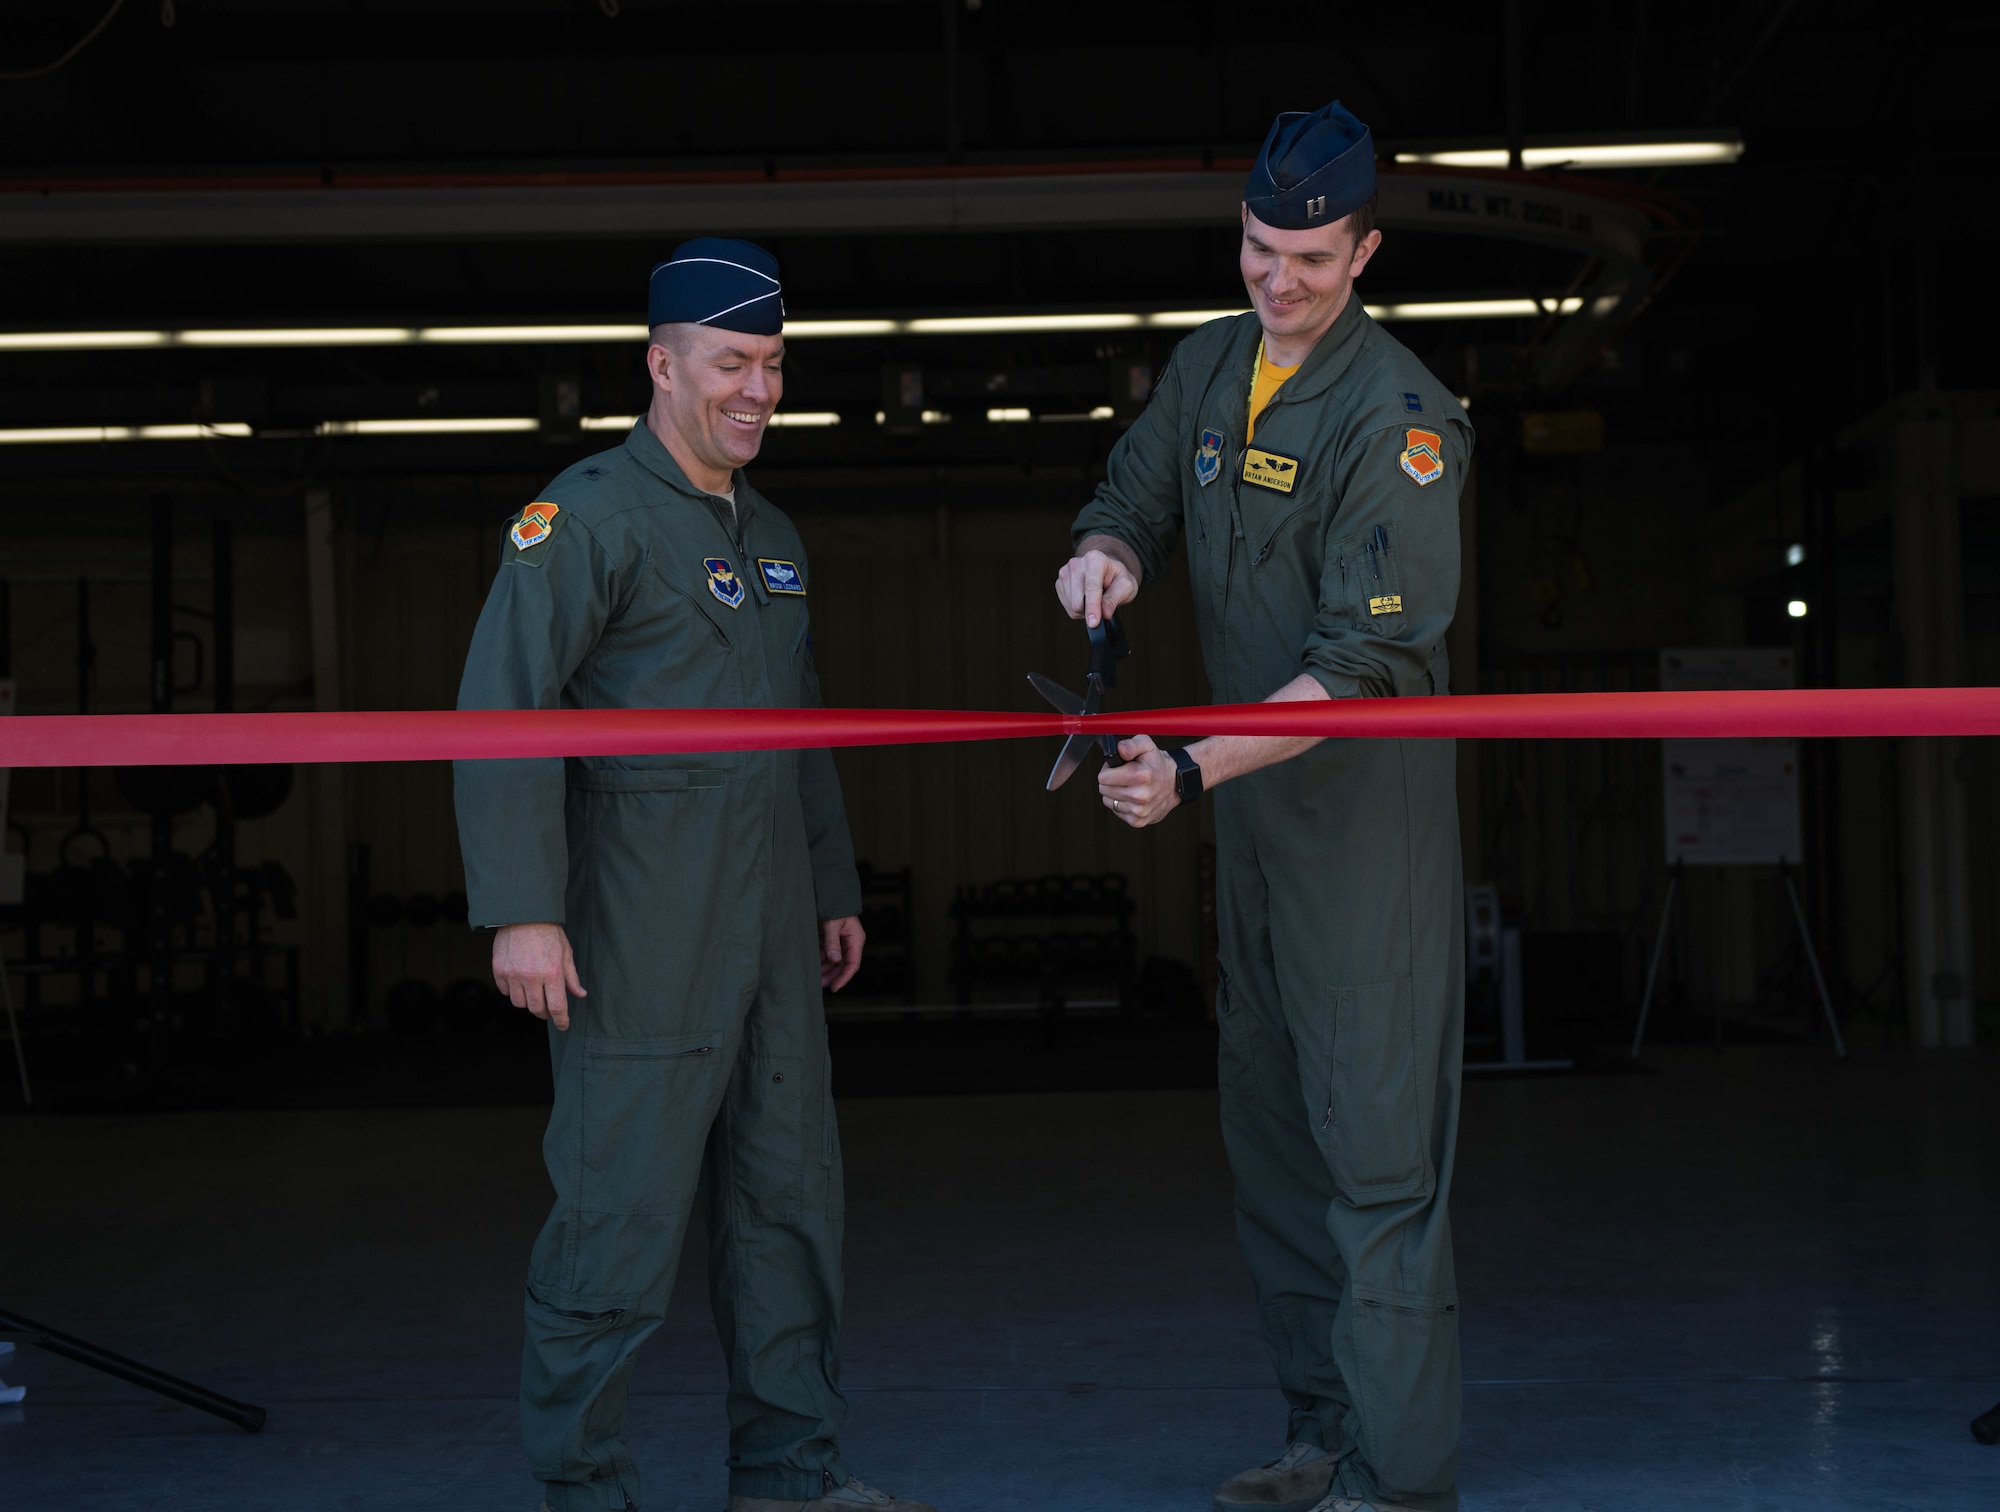 Brig. Gen. Brook Leonard, 56th Fighter Wing commander and Capt. Bryan Anderson, 56th Medical Group flight surgeon, cut the ribbon to the Aviator Center of Excellence at Luke Air Force Base, Ariz., Jan. 26, 2018. The ACE is a new, high-performance athletic training facility for pilots offering one-on-one coaching, individualized fitness plans and fitness equipment. (U.S. Air Force photo/Airman 1st Class Alexander Cook)